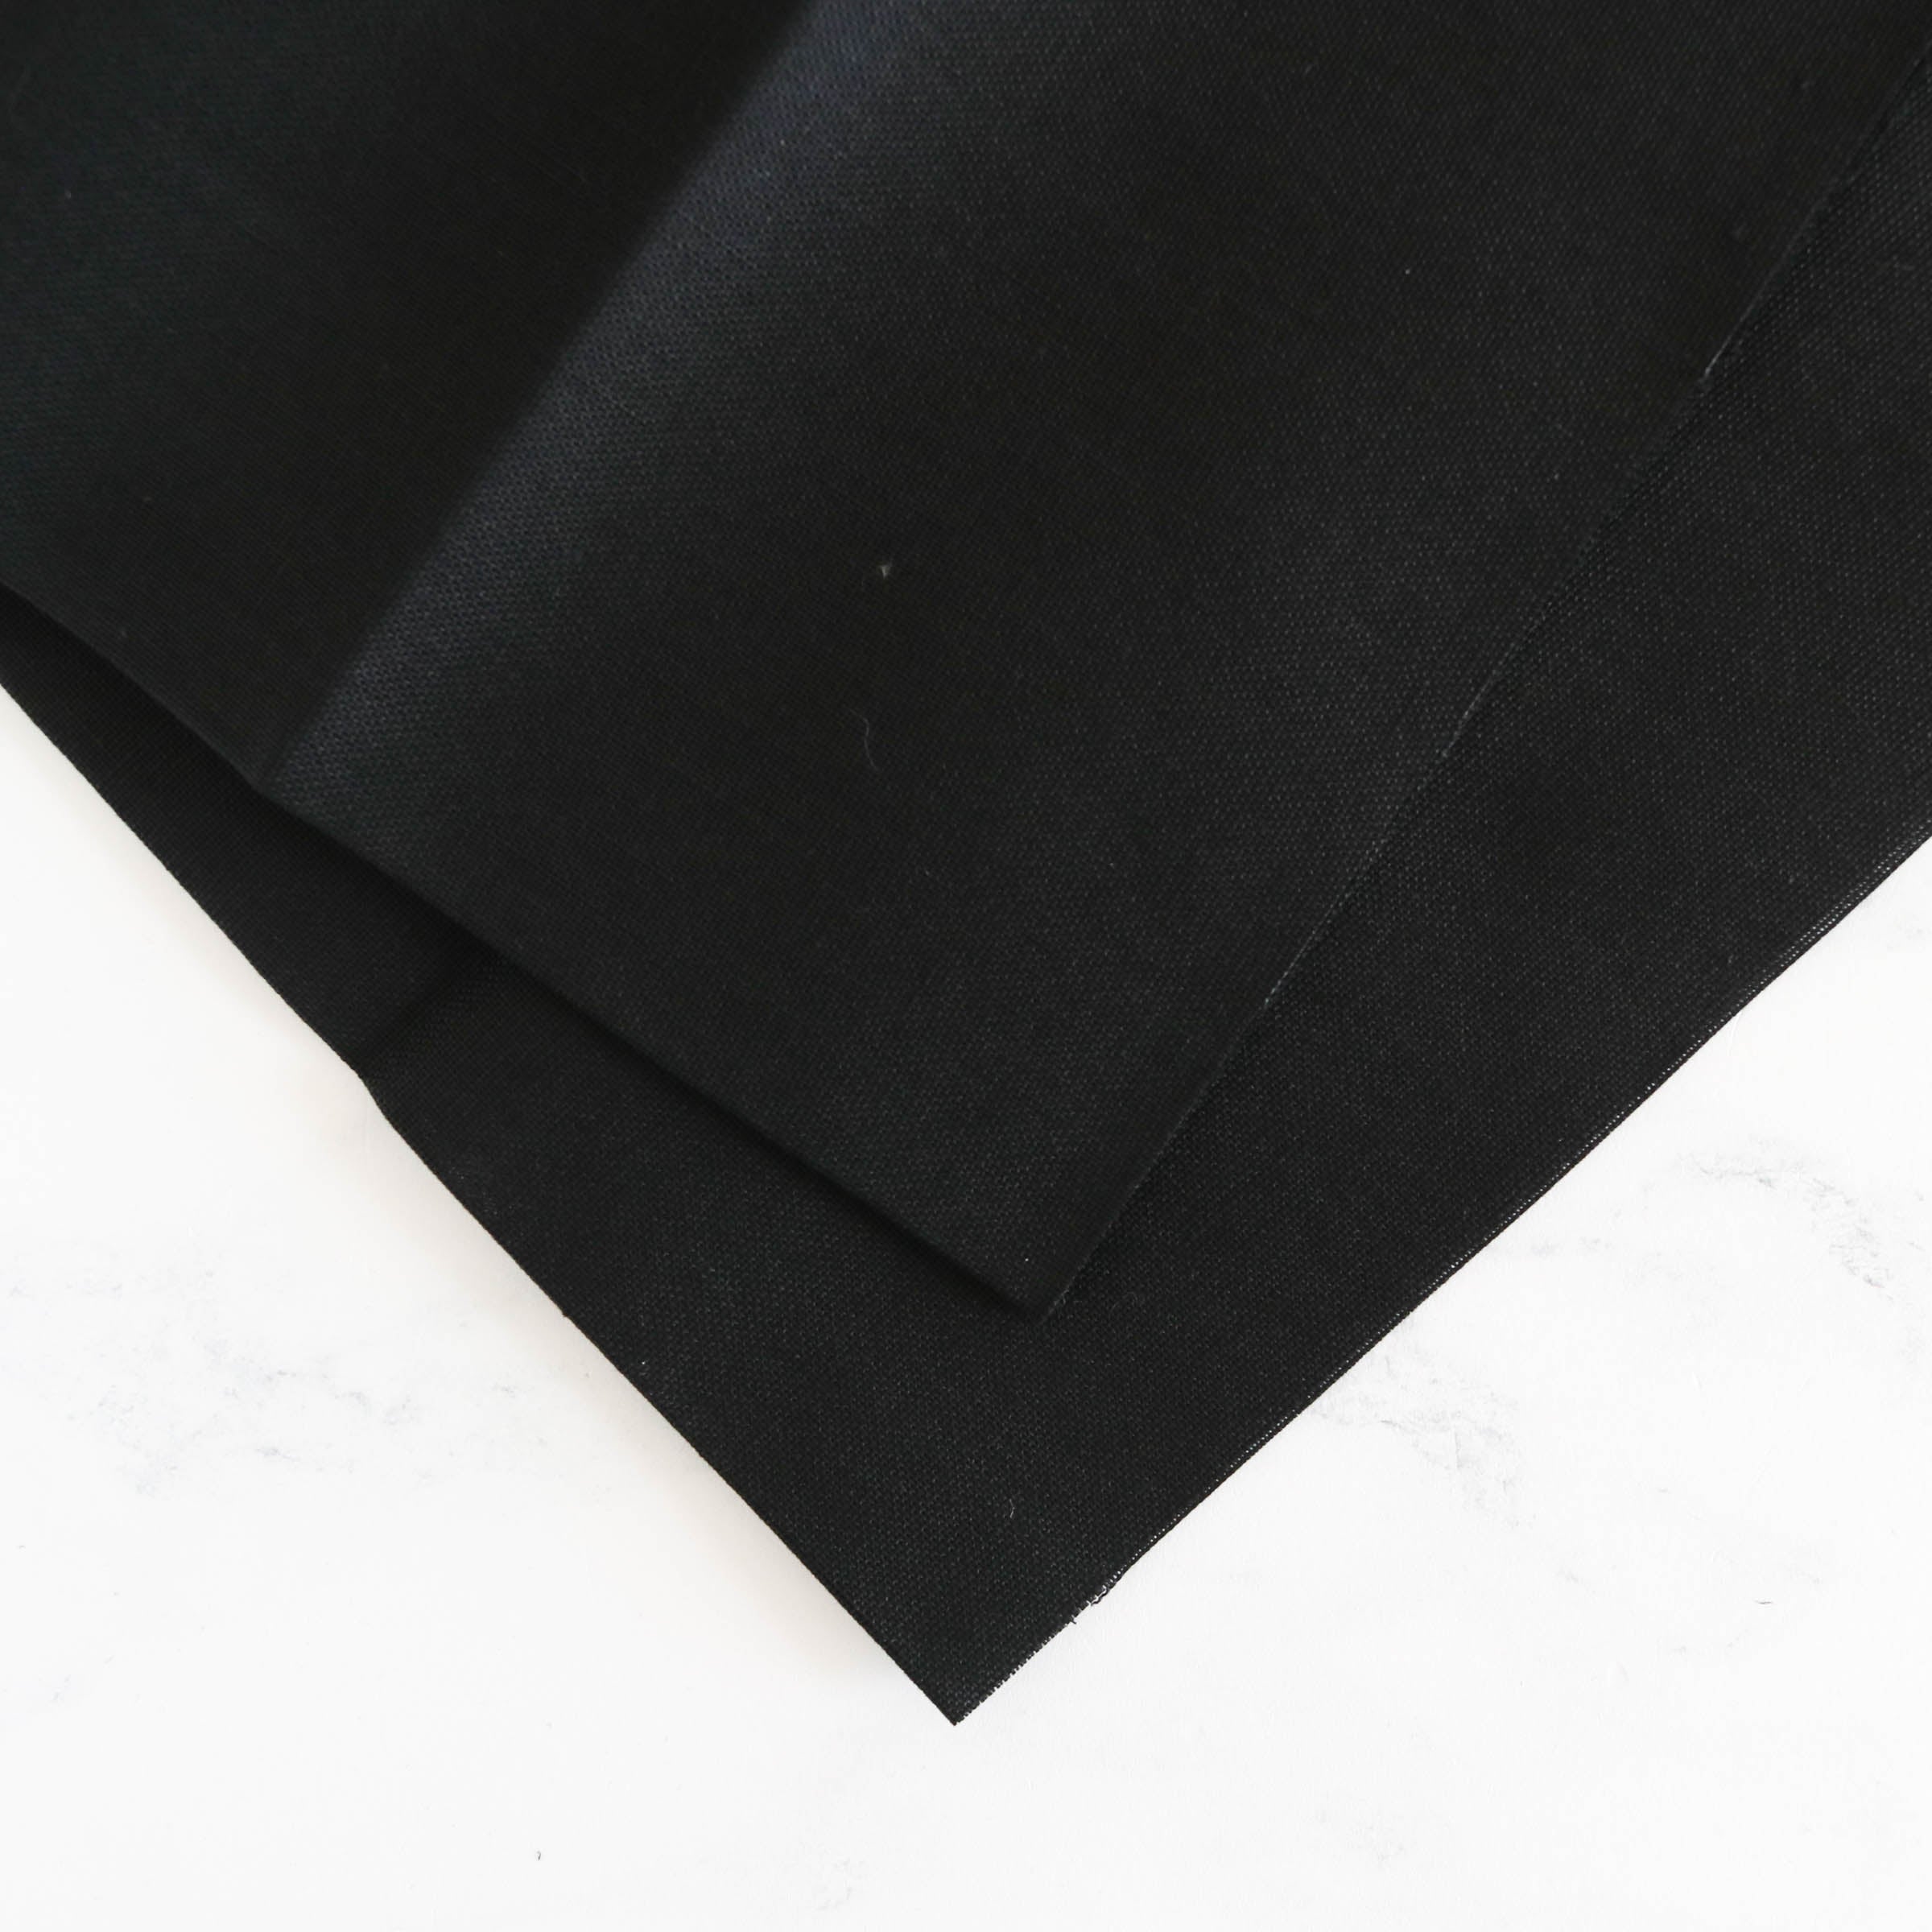 Cotton Hand Embroidery Fabric - Black - Stitched Modern